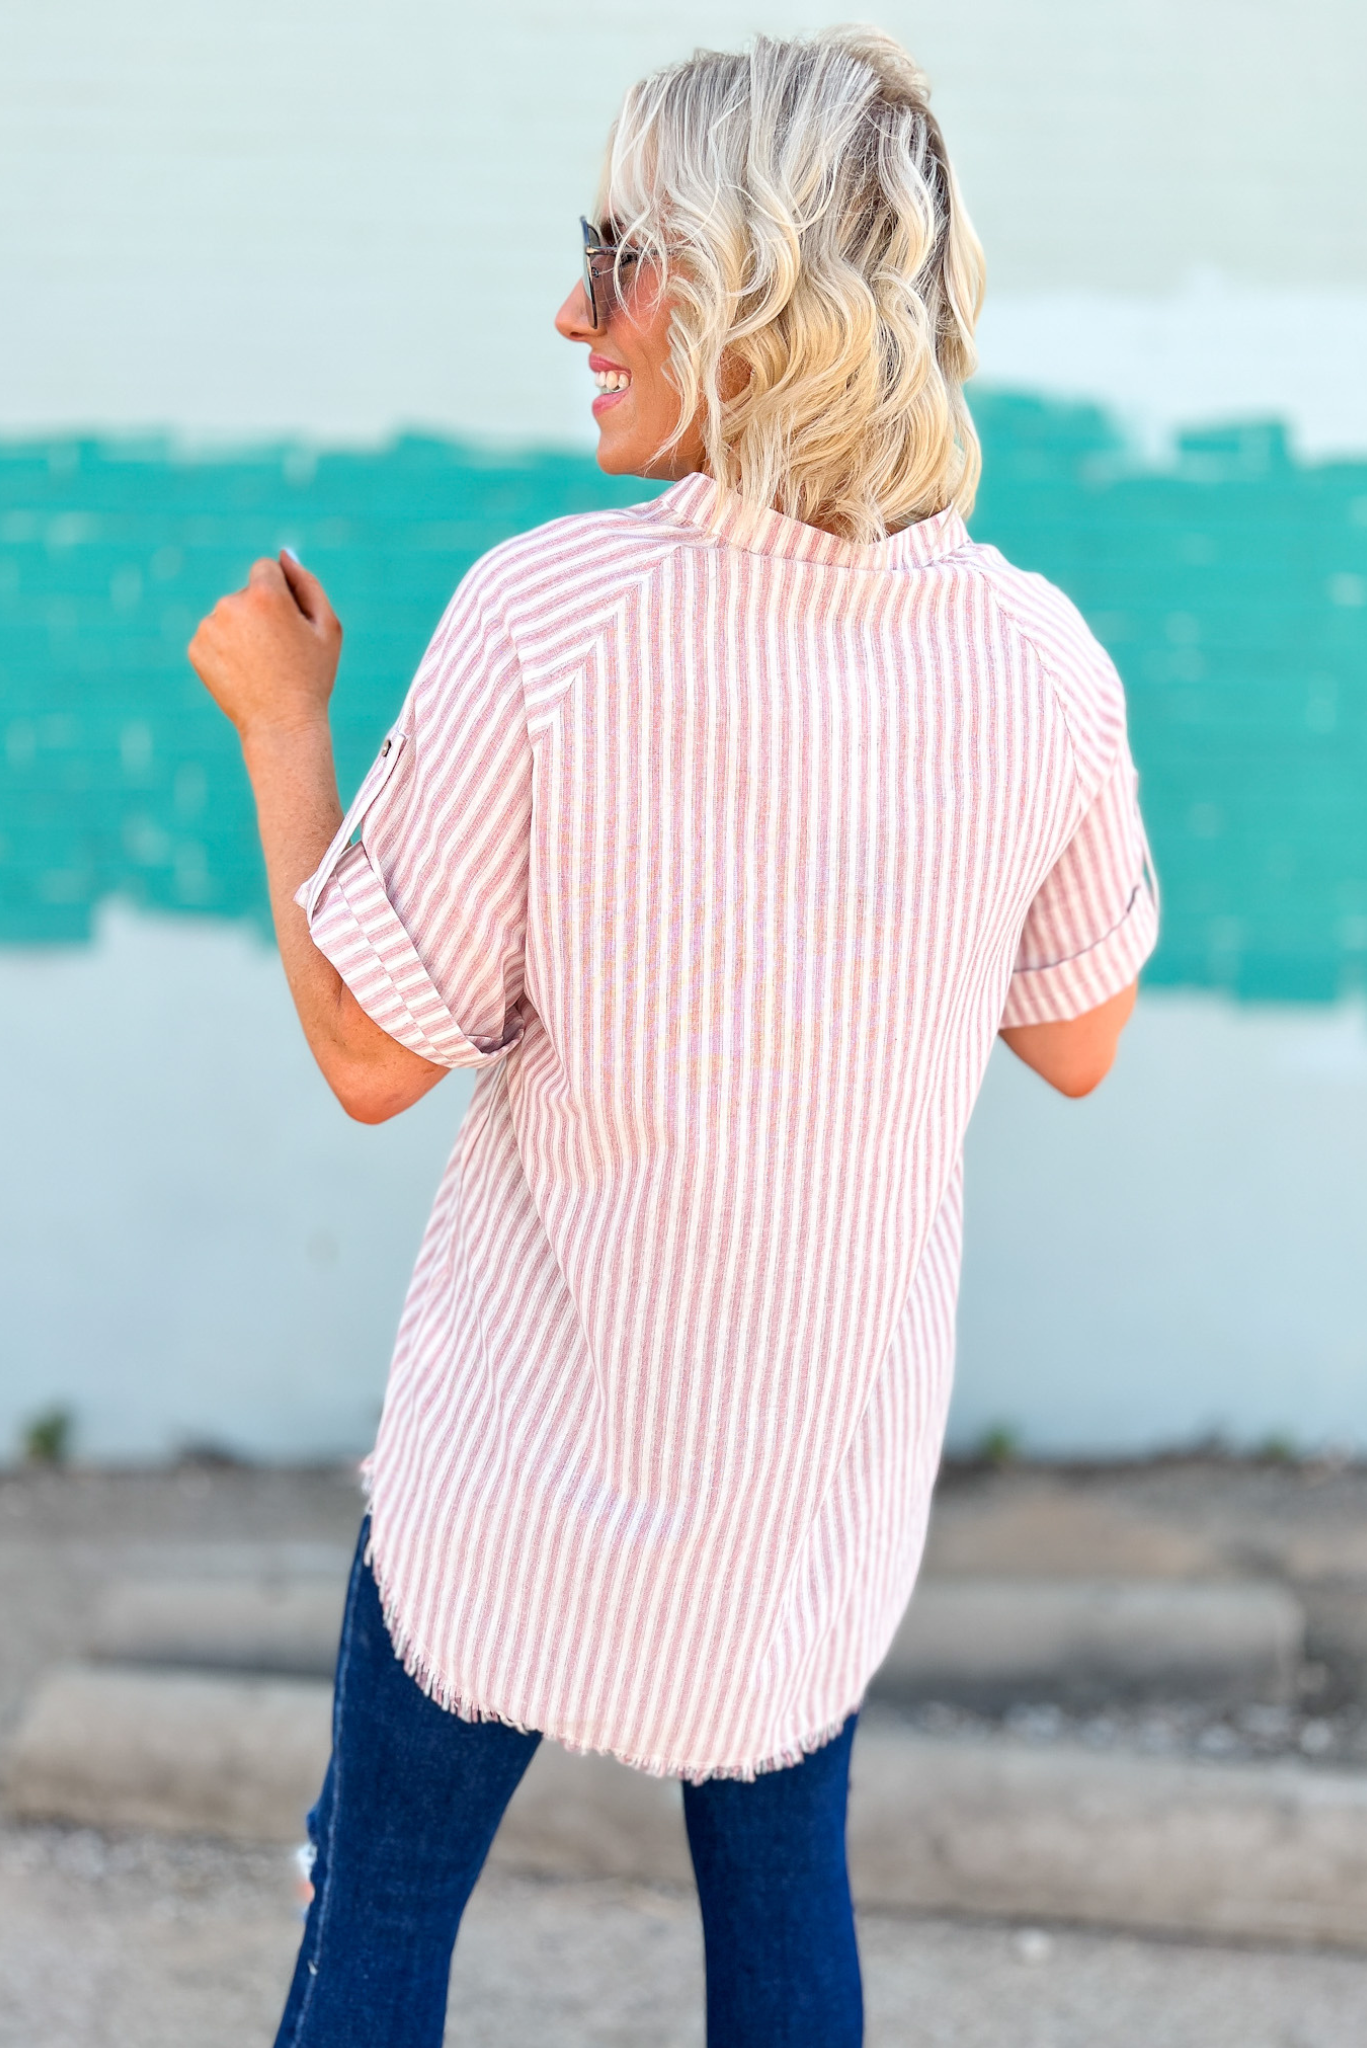 Load image into Gallery viewer, Dusty Blush Striped V Neck Roll Up Sleeve Top, v neck, button down, button down top, tunic top, rolled sleeves, short sleeves, raw hem, striped top, Shop Style Your Senses By Mallory Fitzsimmons
